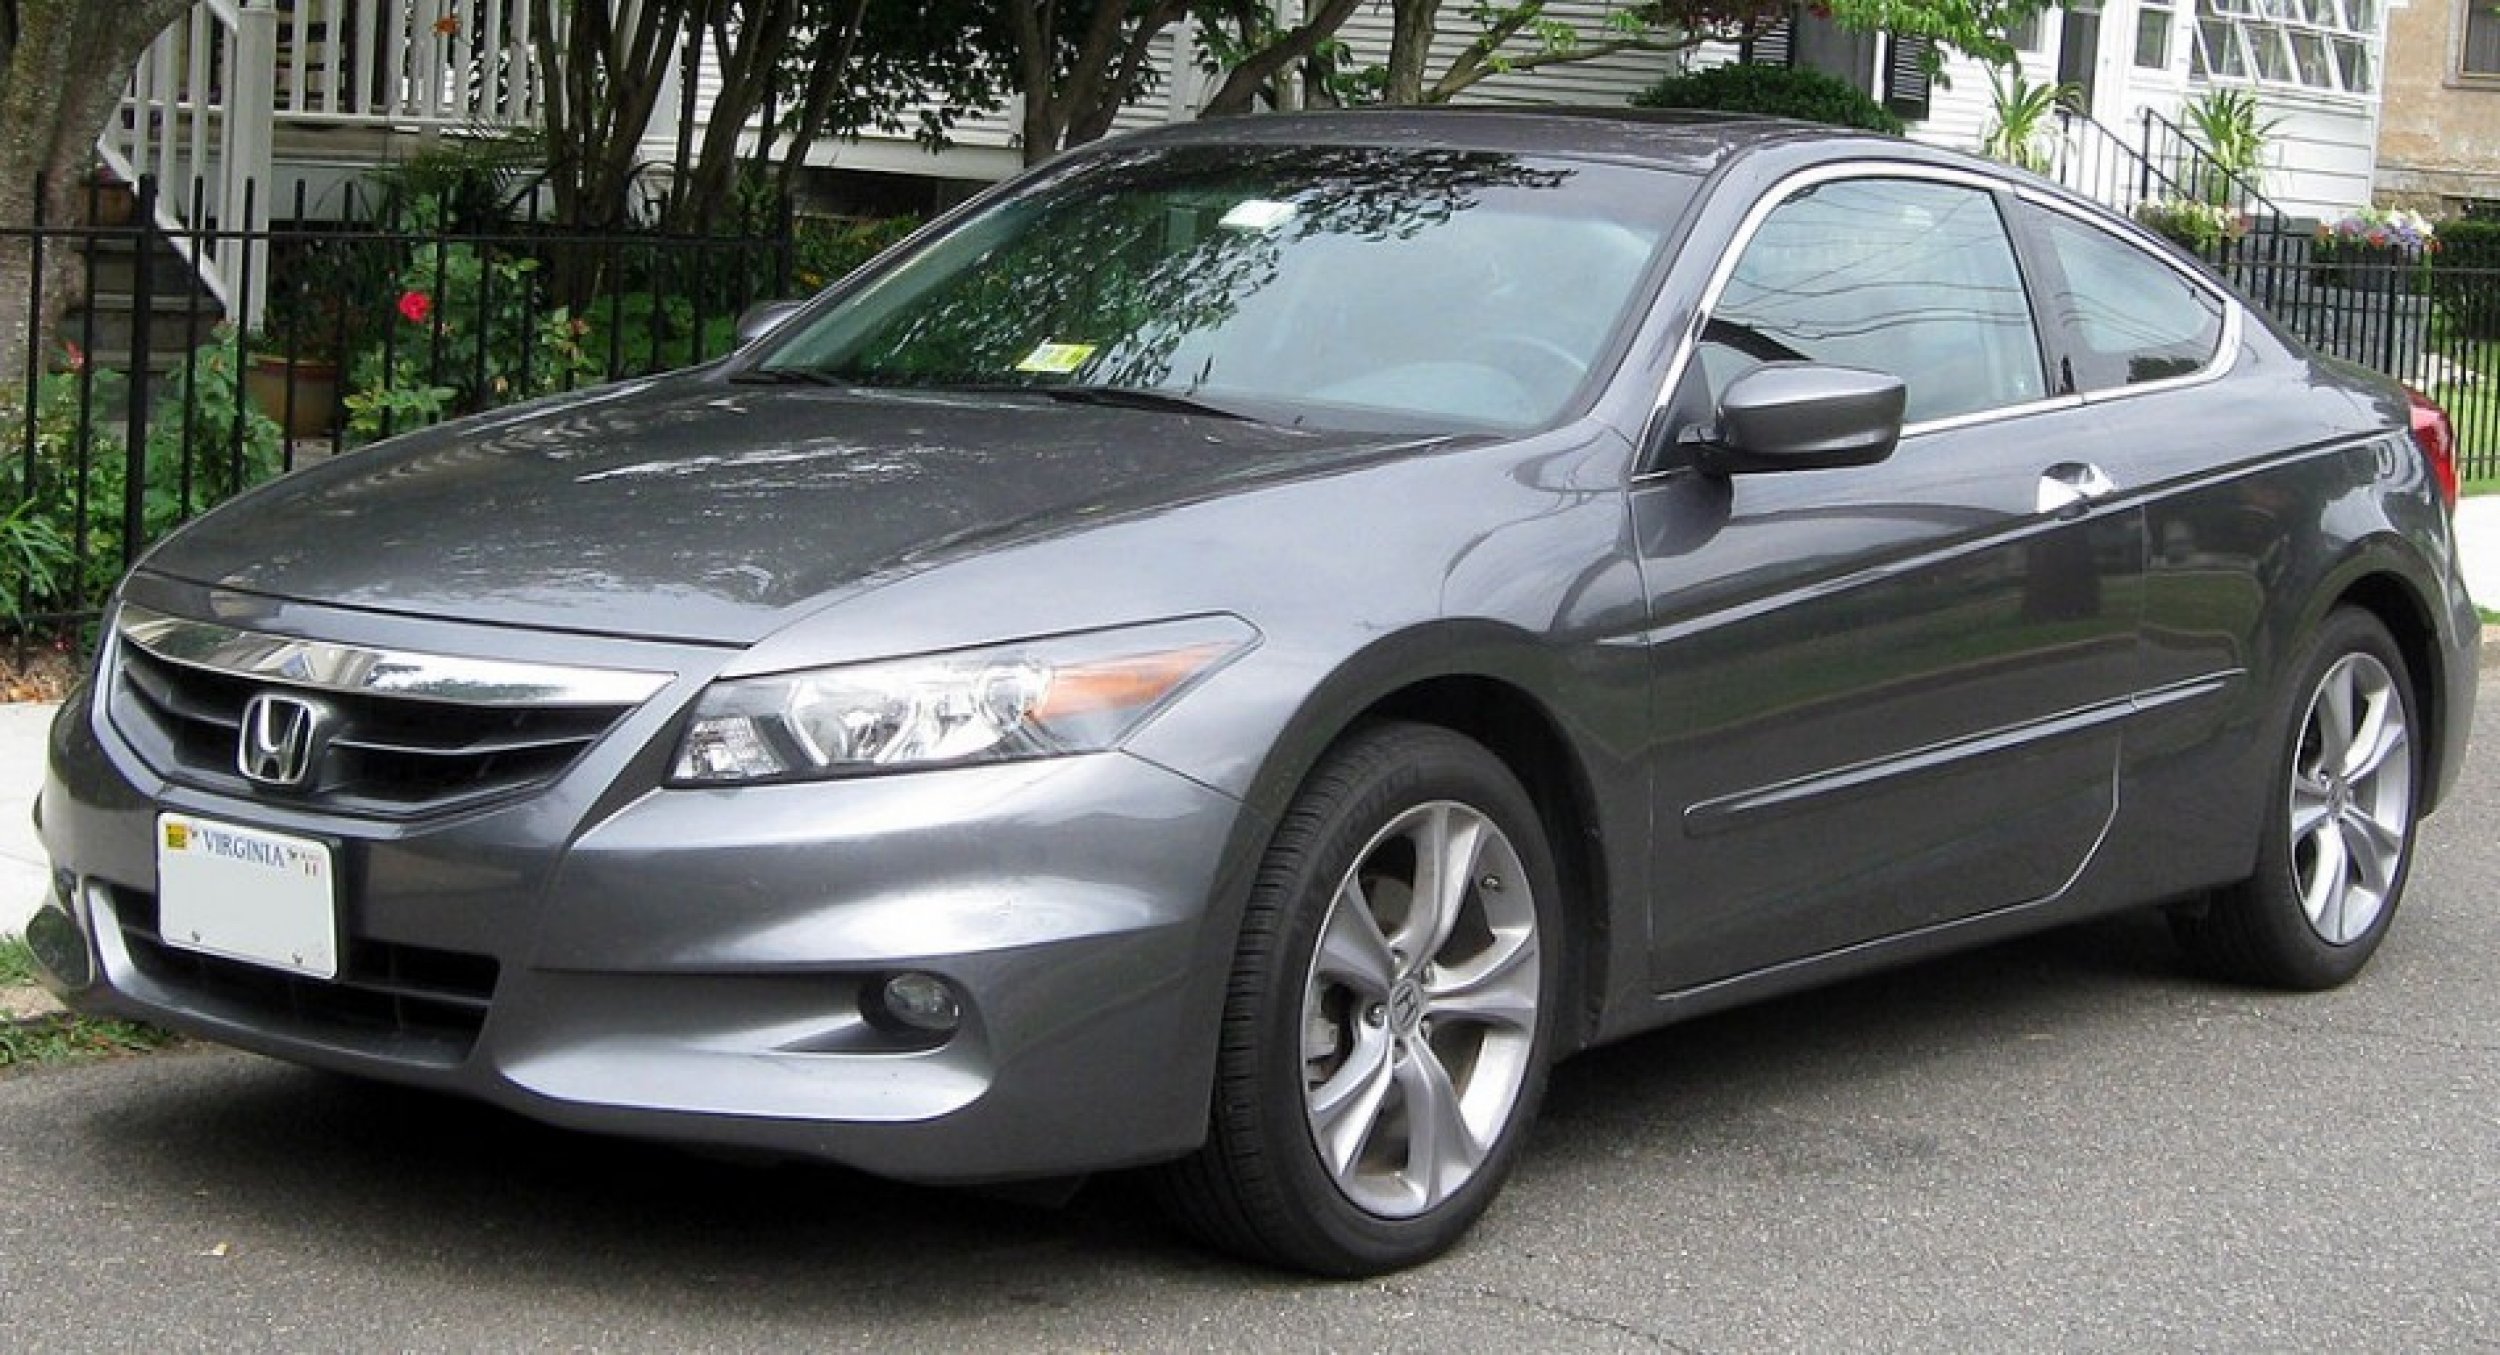 The 8 most popular car in Americas wealthiest zip codes is the Honda Accord with an MSRP of 23,070.